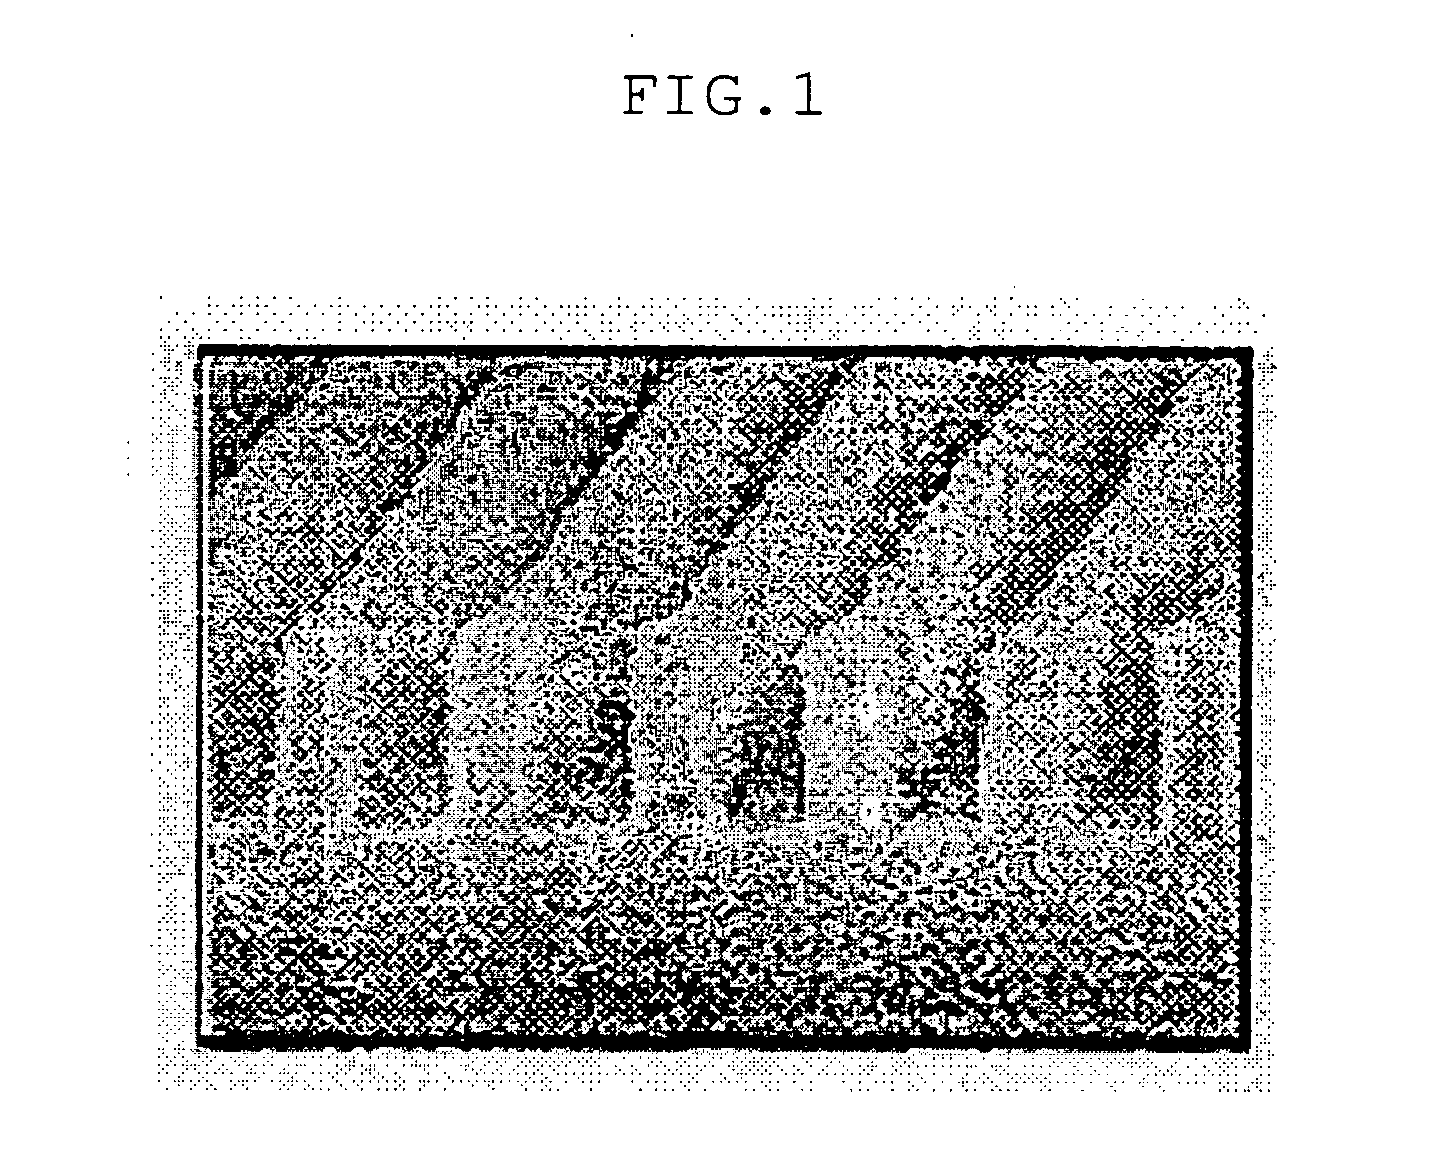 Light absorbent agent polymer useful for organic anti-reflective coating, its preparation method and organic anti-reflective coating composition comprising the same